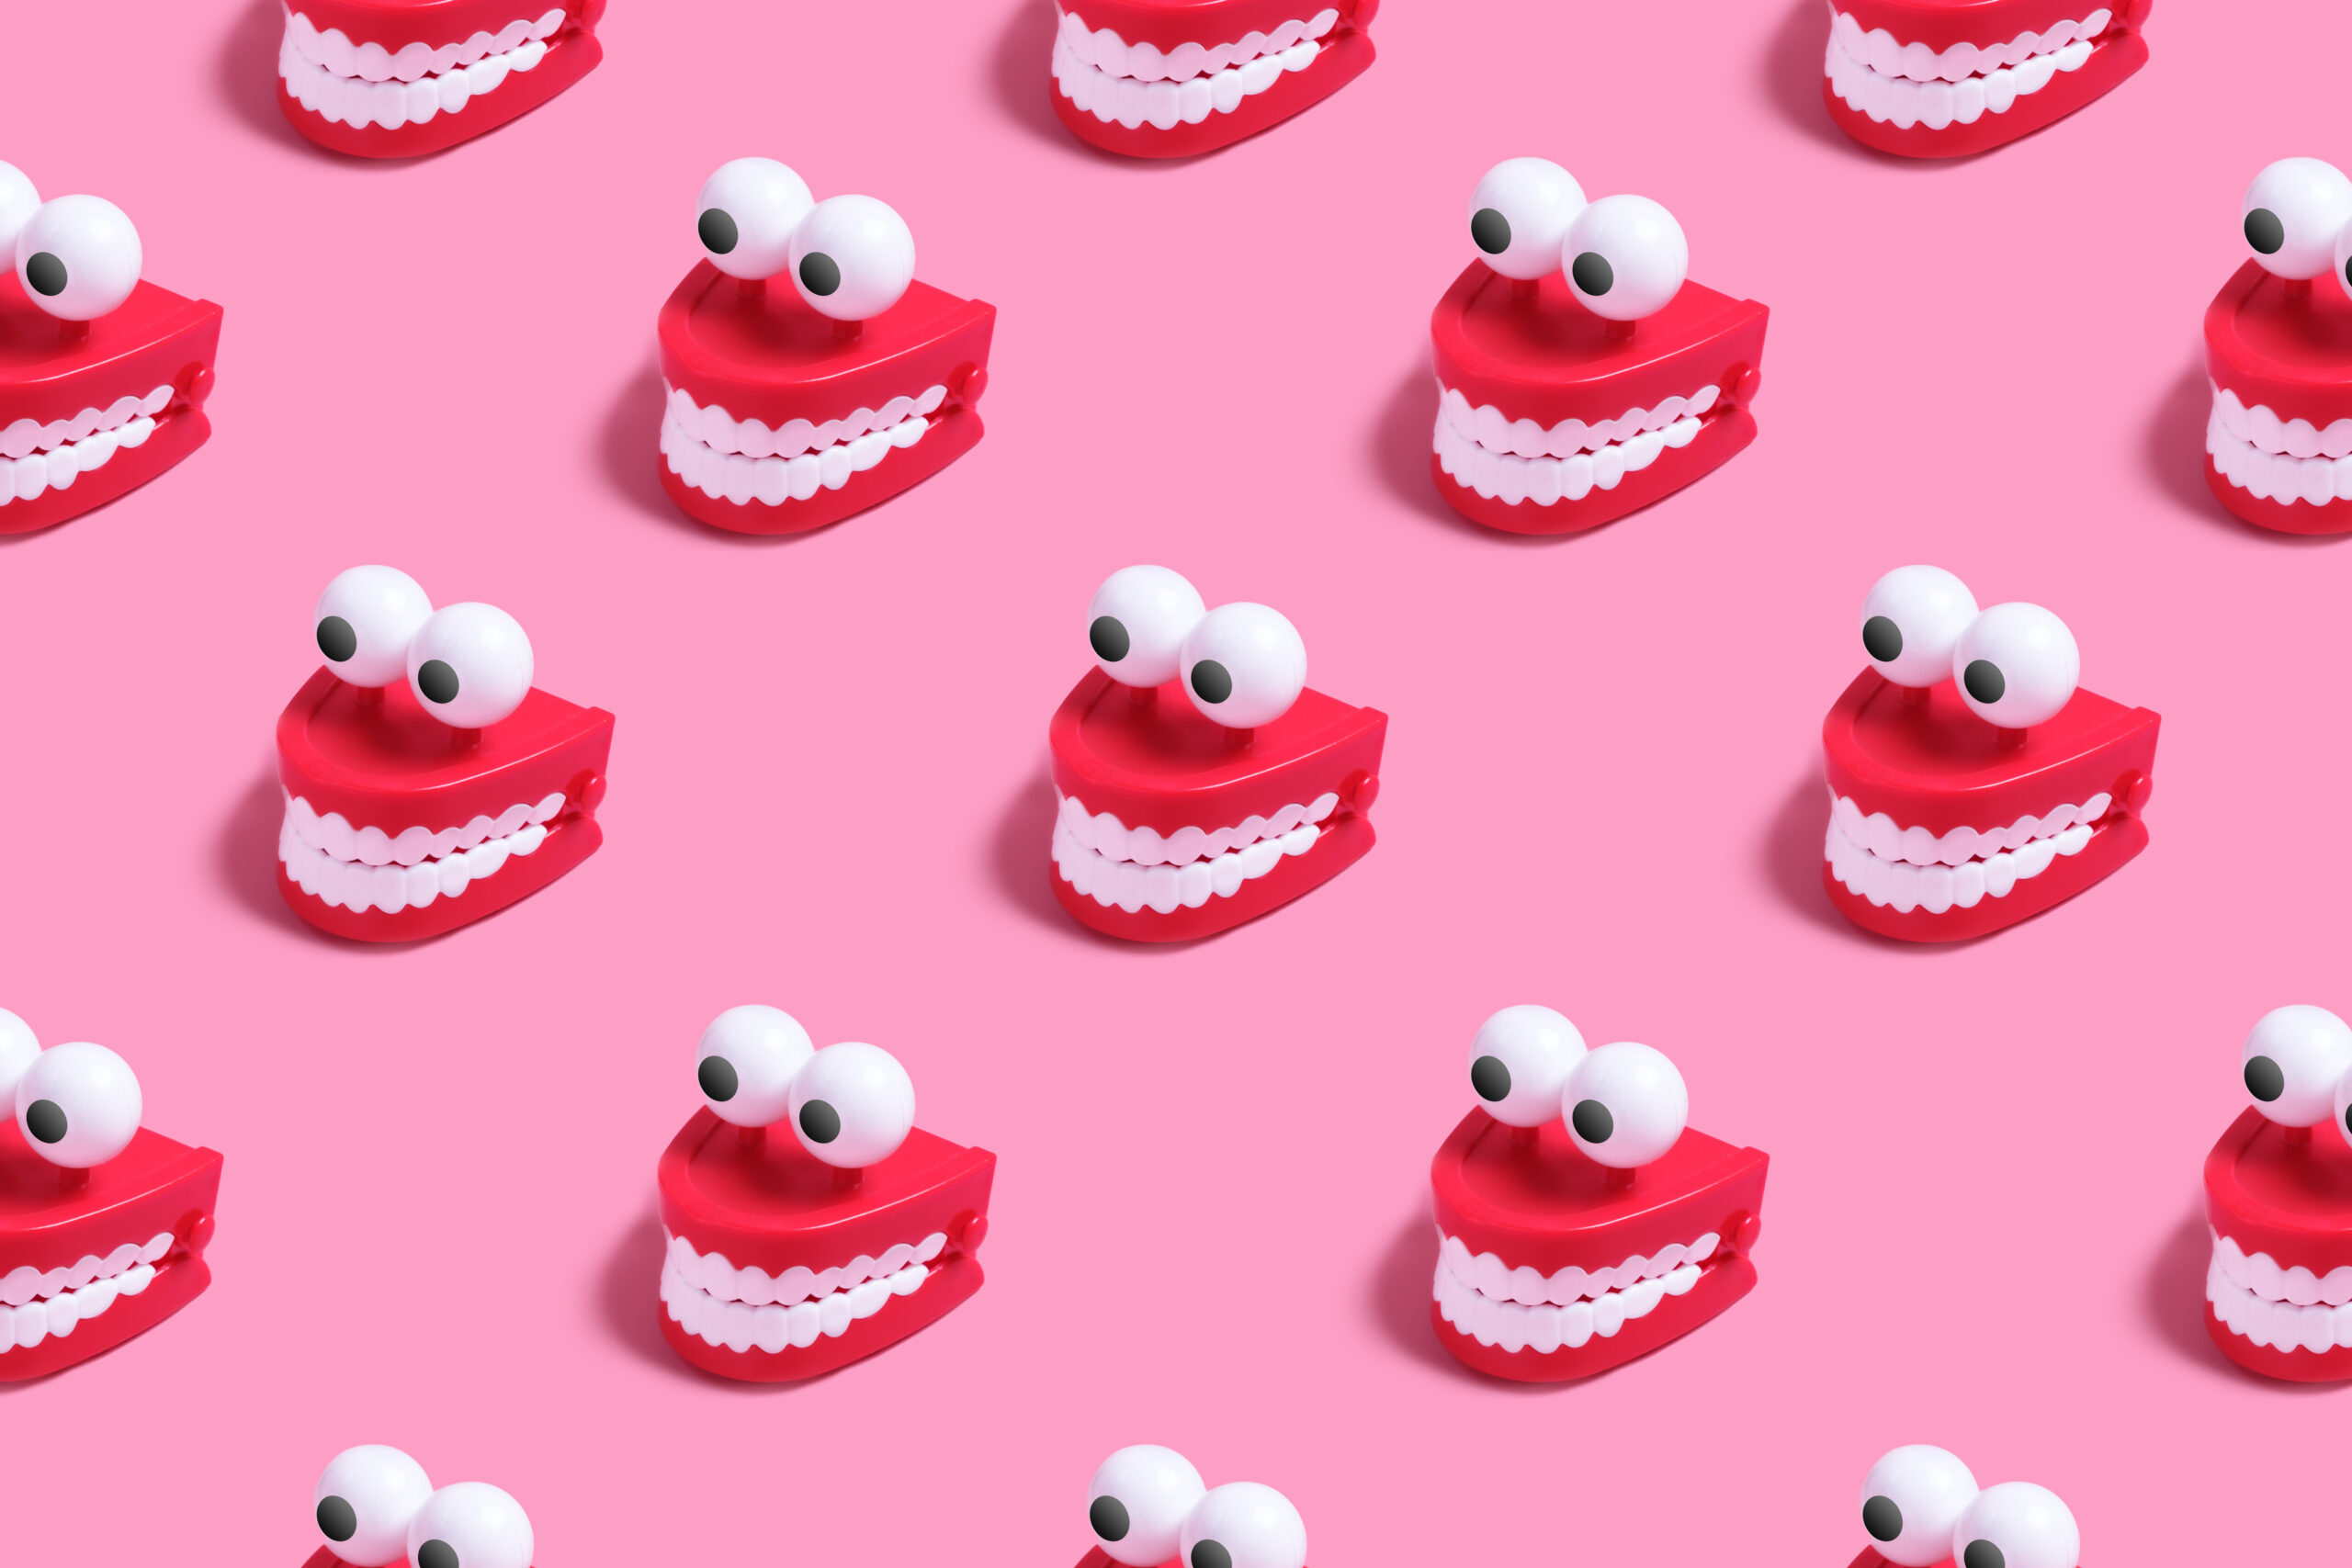 Pattern plastic toy in the form of red jaws with white teeth and eyes